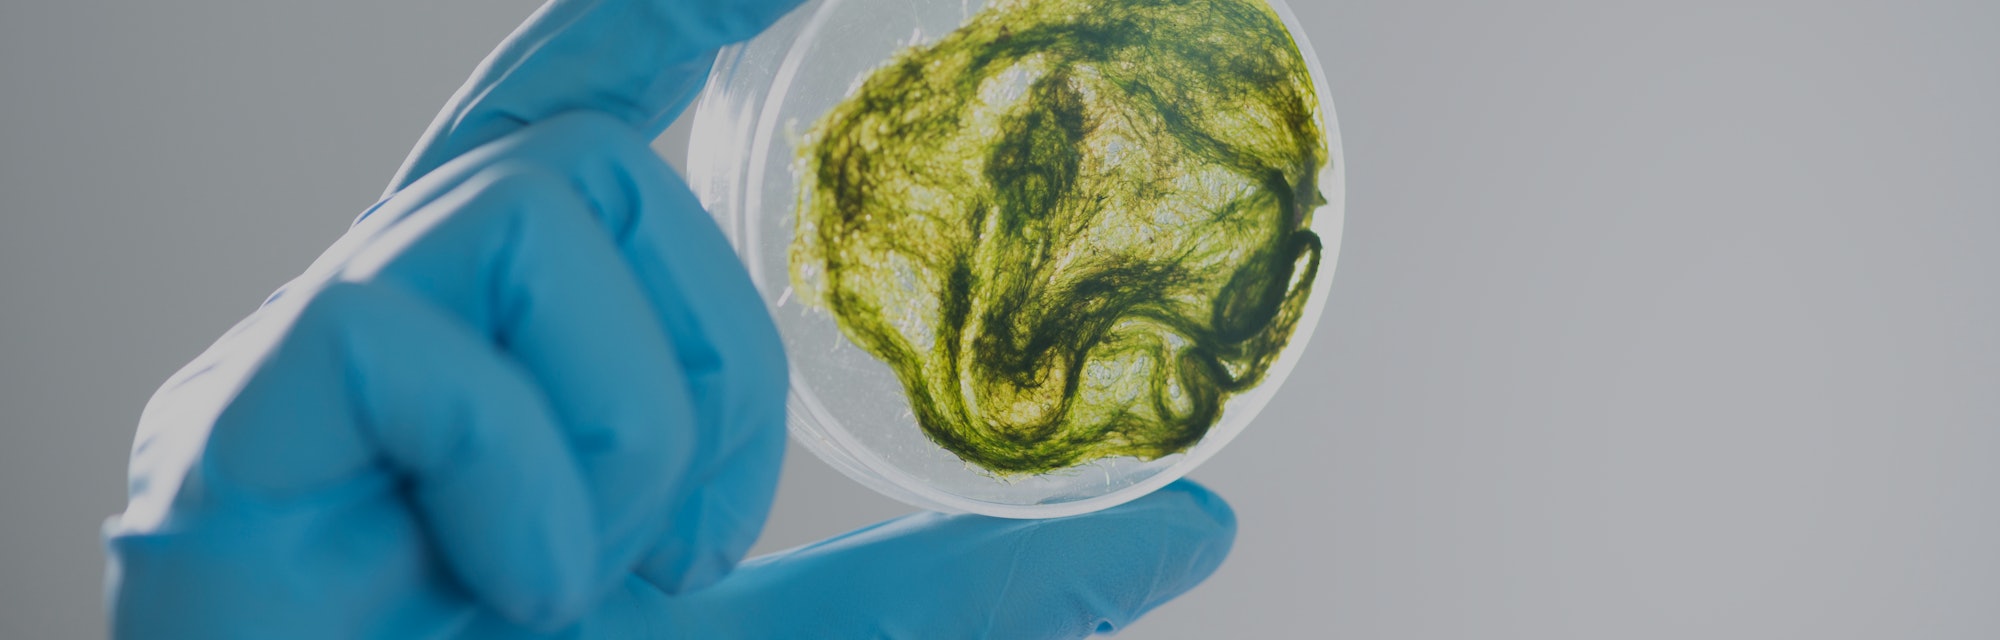 A hand wearing a light blue lab glove can be seen holding a sample of bright green algae in a spheri...